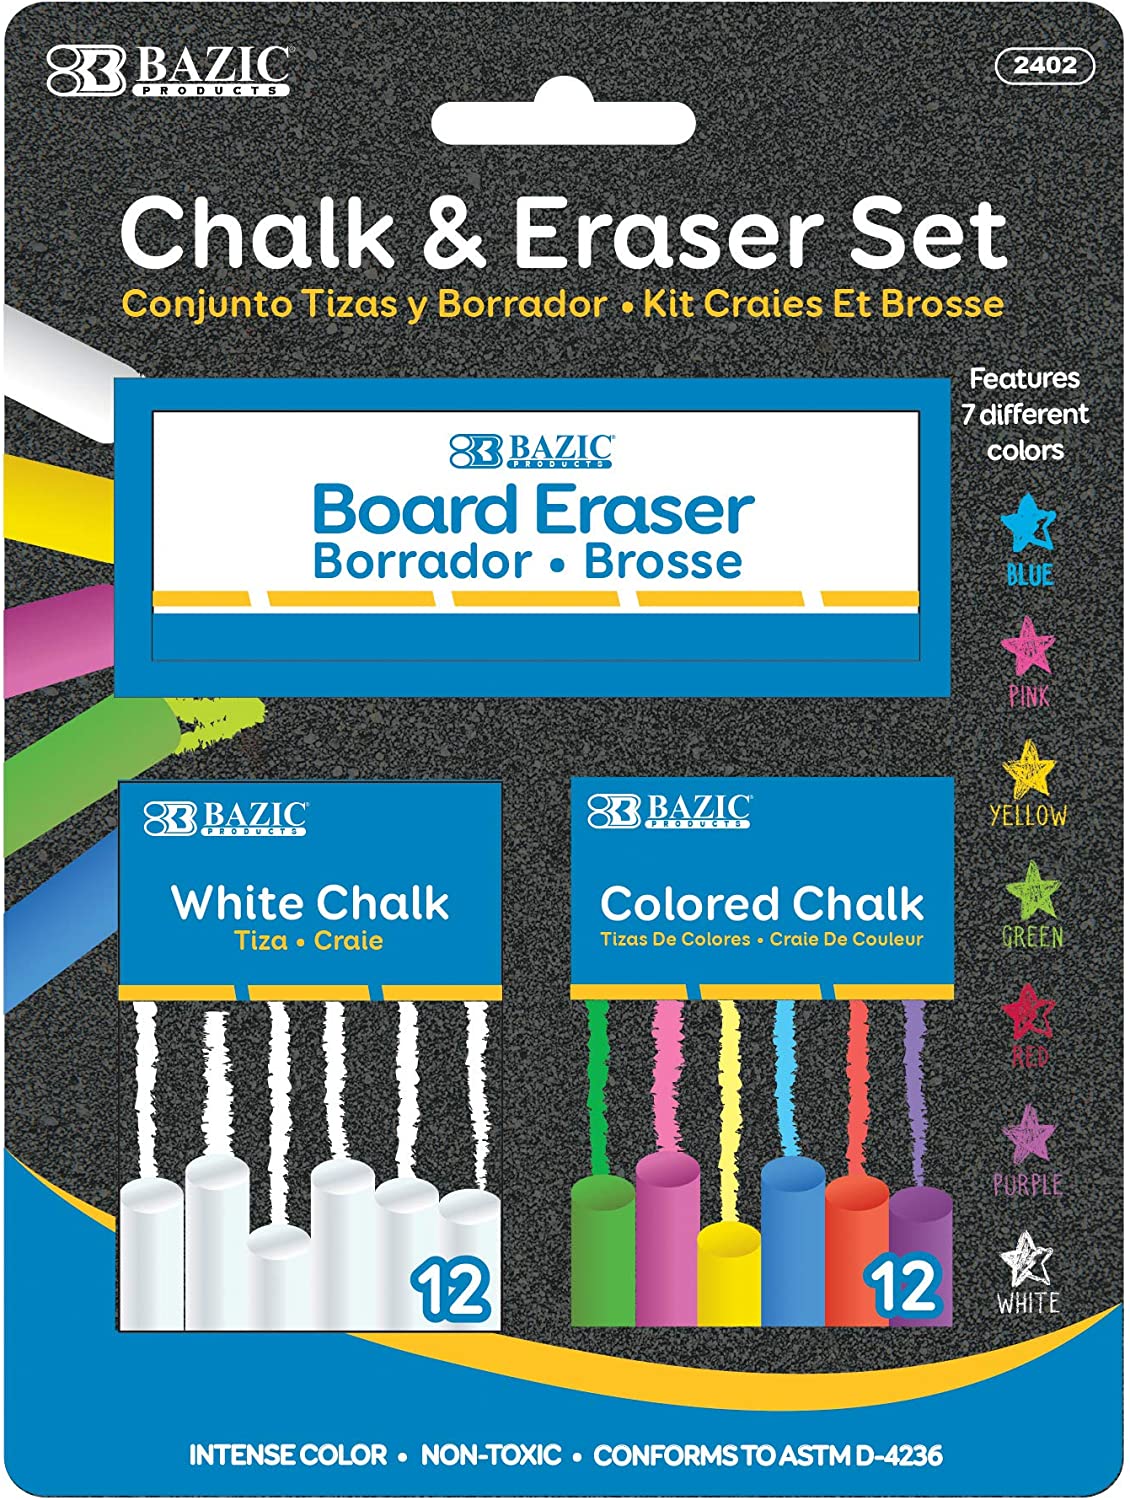 12 Color and 12 White Chalk with Eraser Set - School, Art, Crafts, or Outside - Boardroom or Classroom